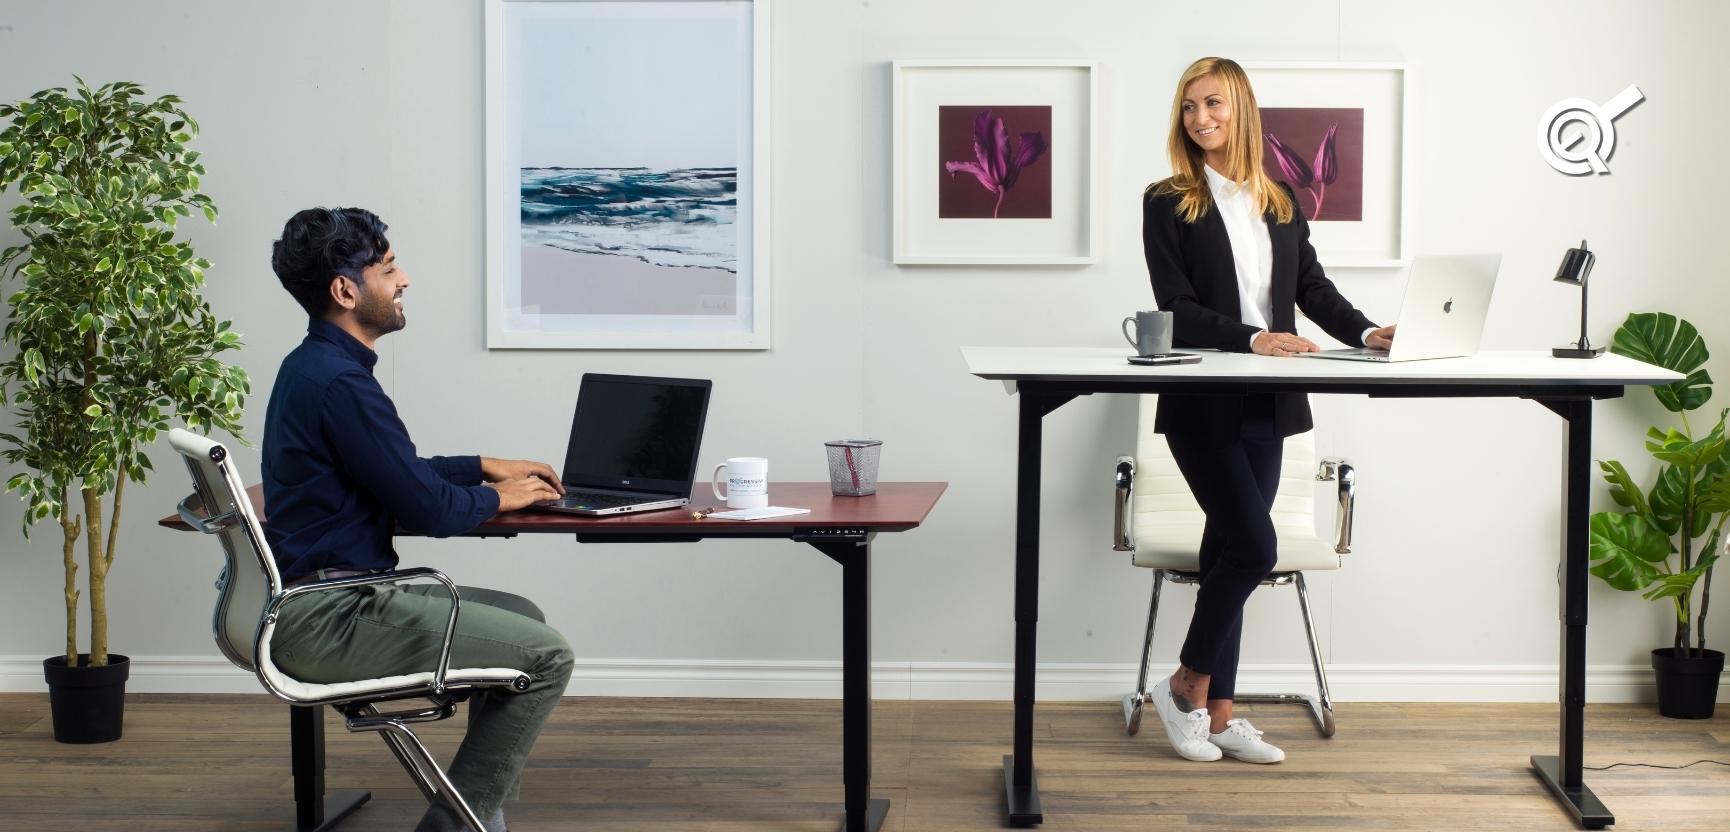 Recommended Standing Desk Usage Times: Sitting, Standing